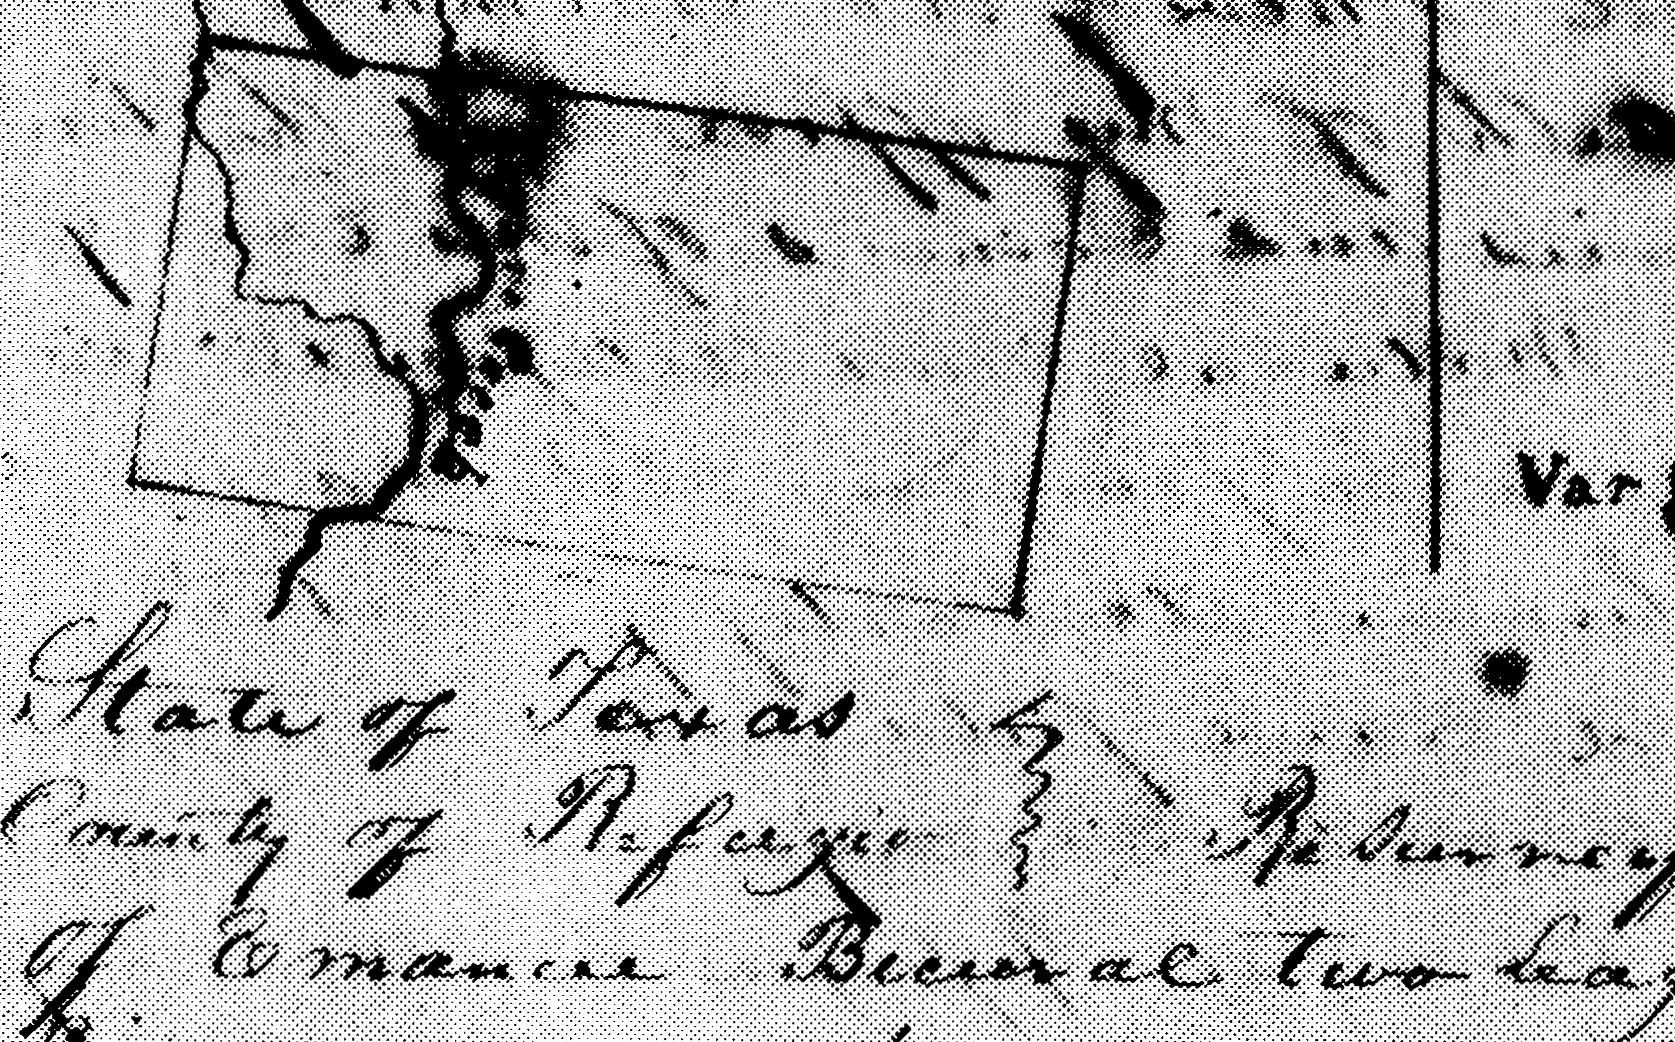 The Bacerra original land grant which shows site at the junction of Copano Creek